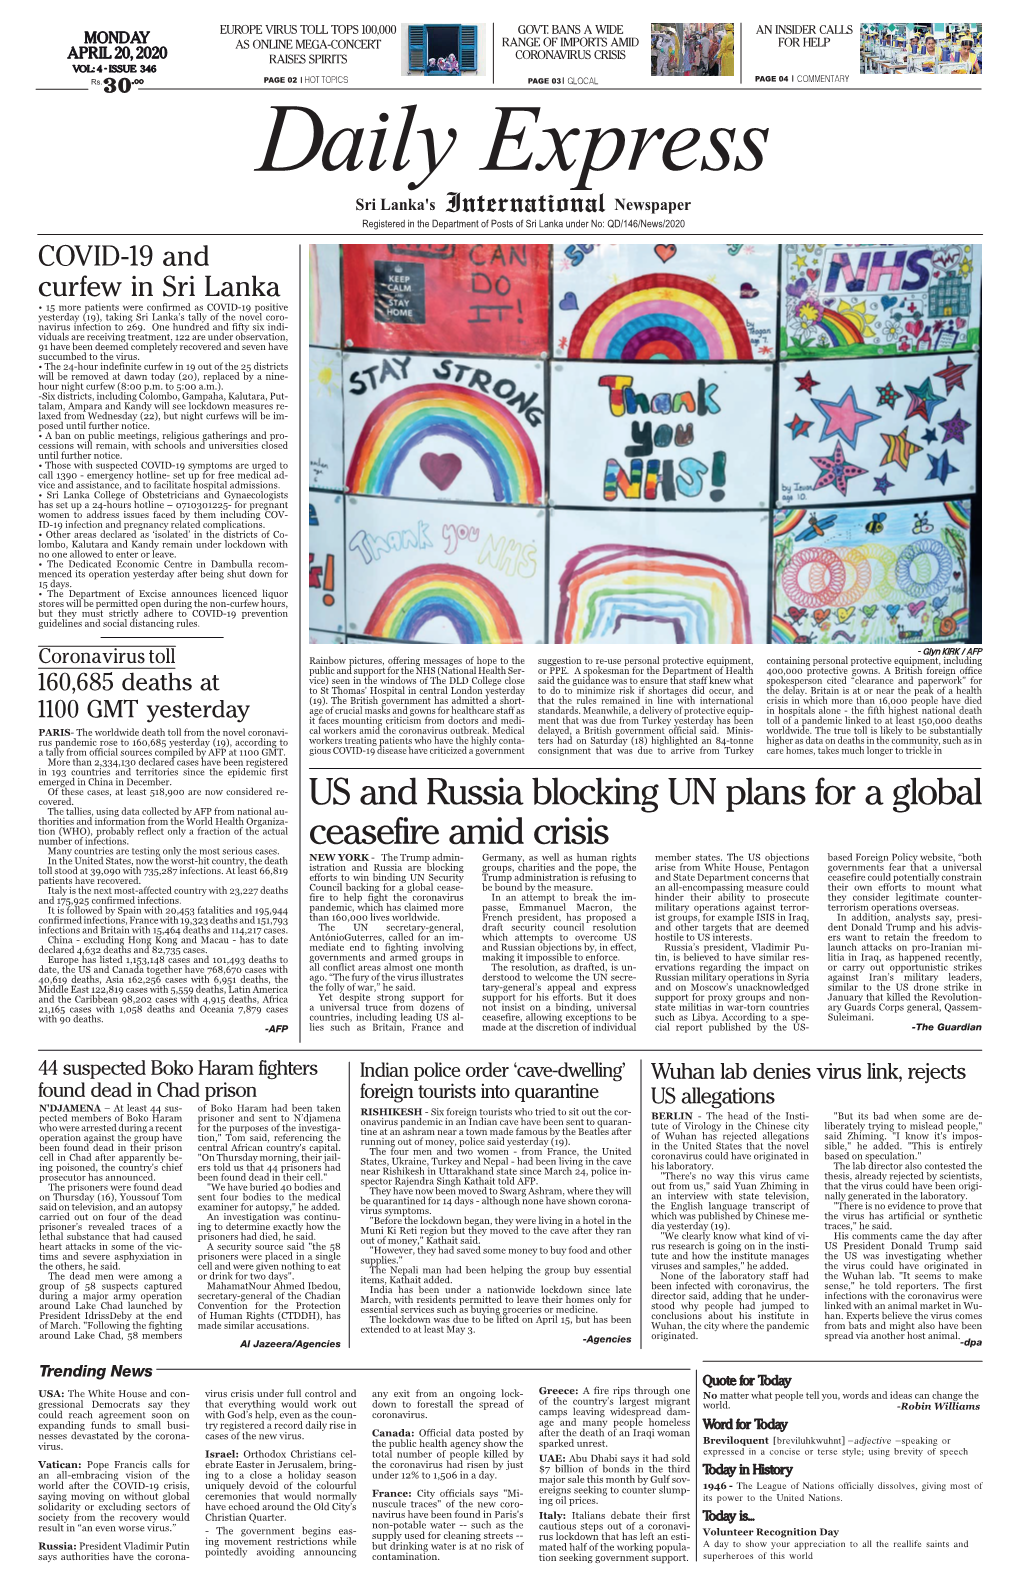 Daily Express 20042020